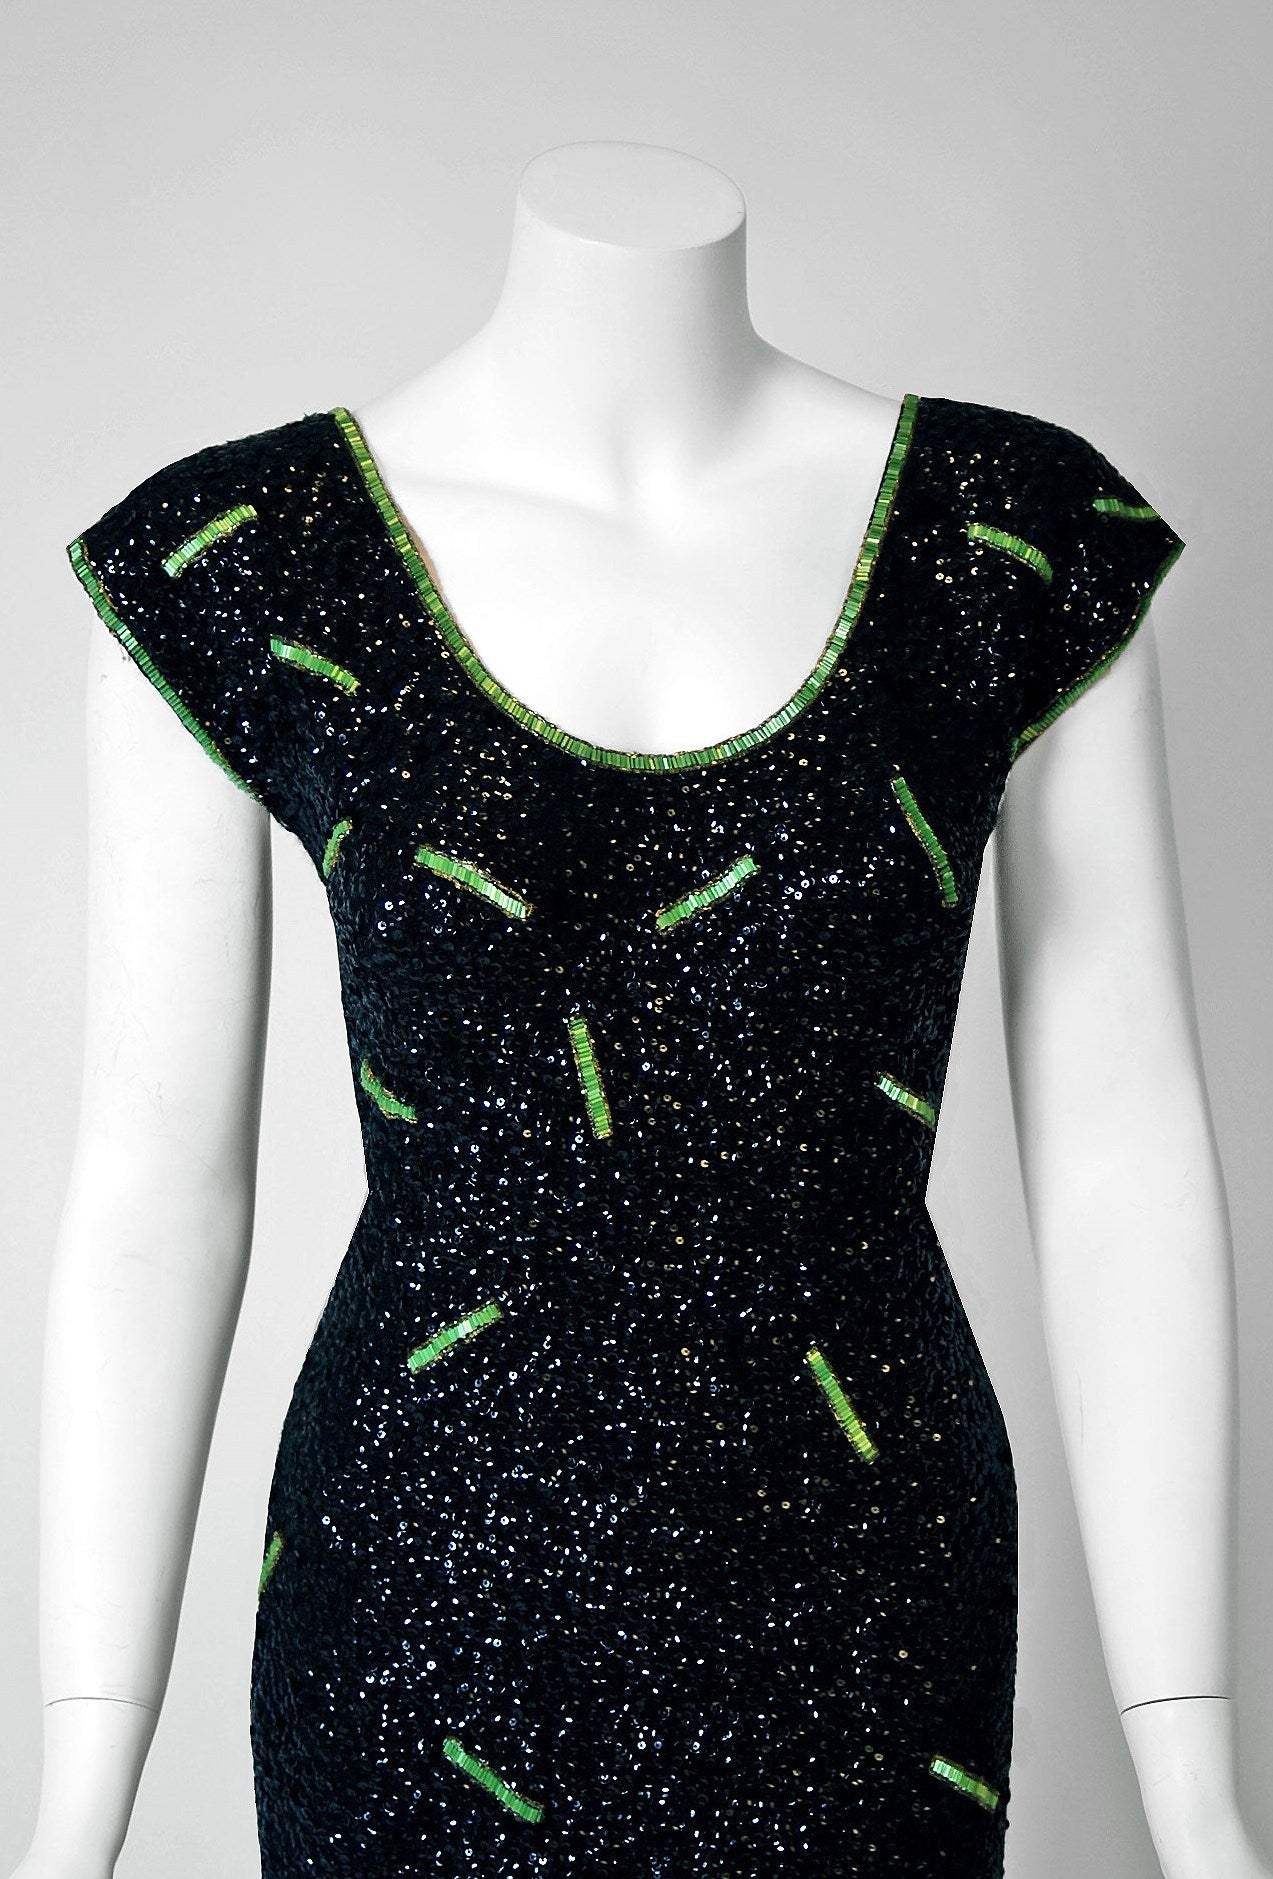 1950's Gene Shelly designer garments are in a class of their own. They are always fully-sequined by hand and fit to flatter the figure. This treasure has a fantastic abstract pattern, featuring clear glass-beads around green jewels. The base is a